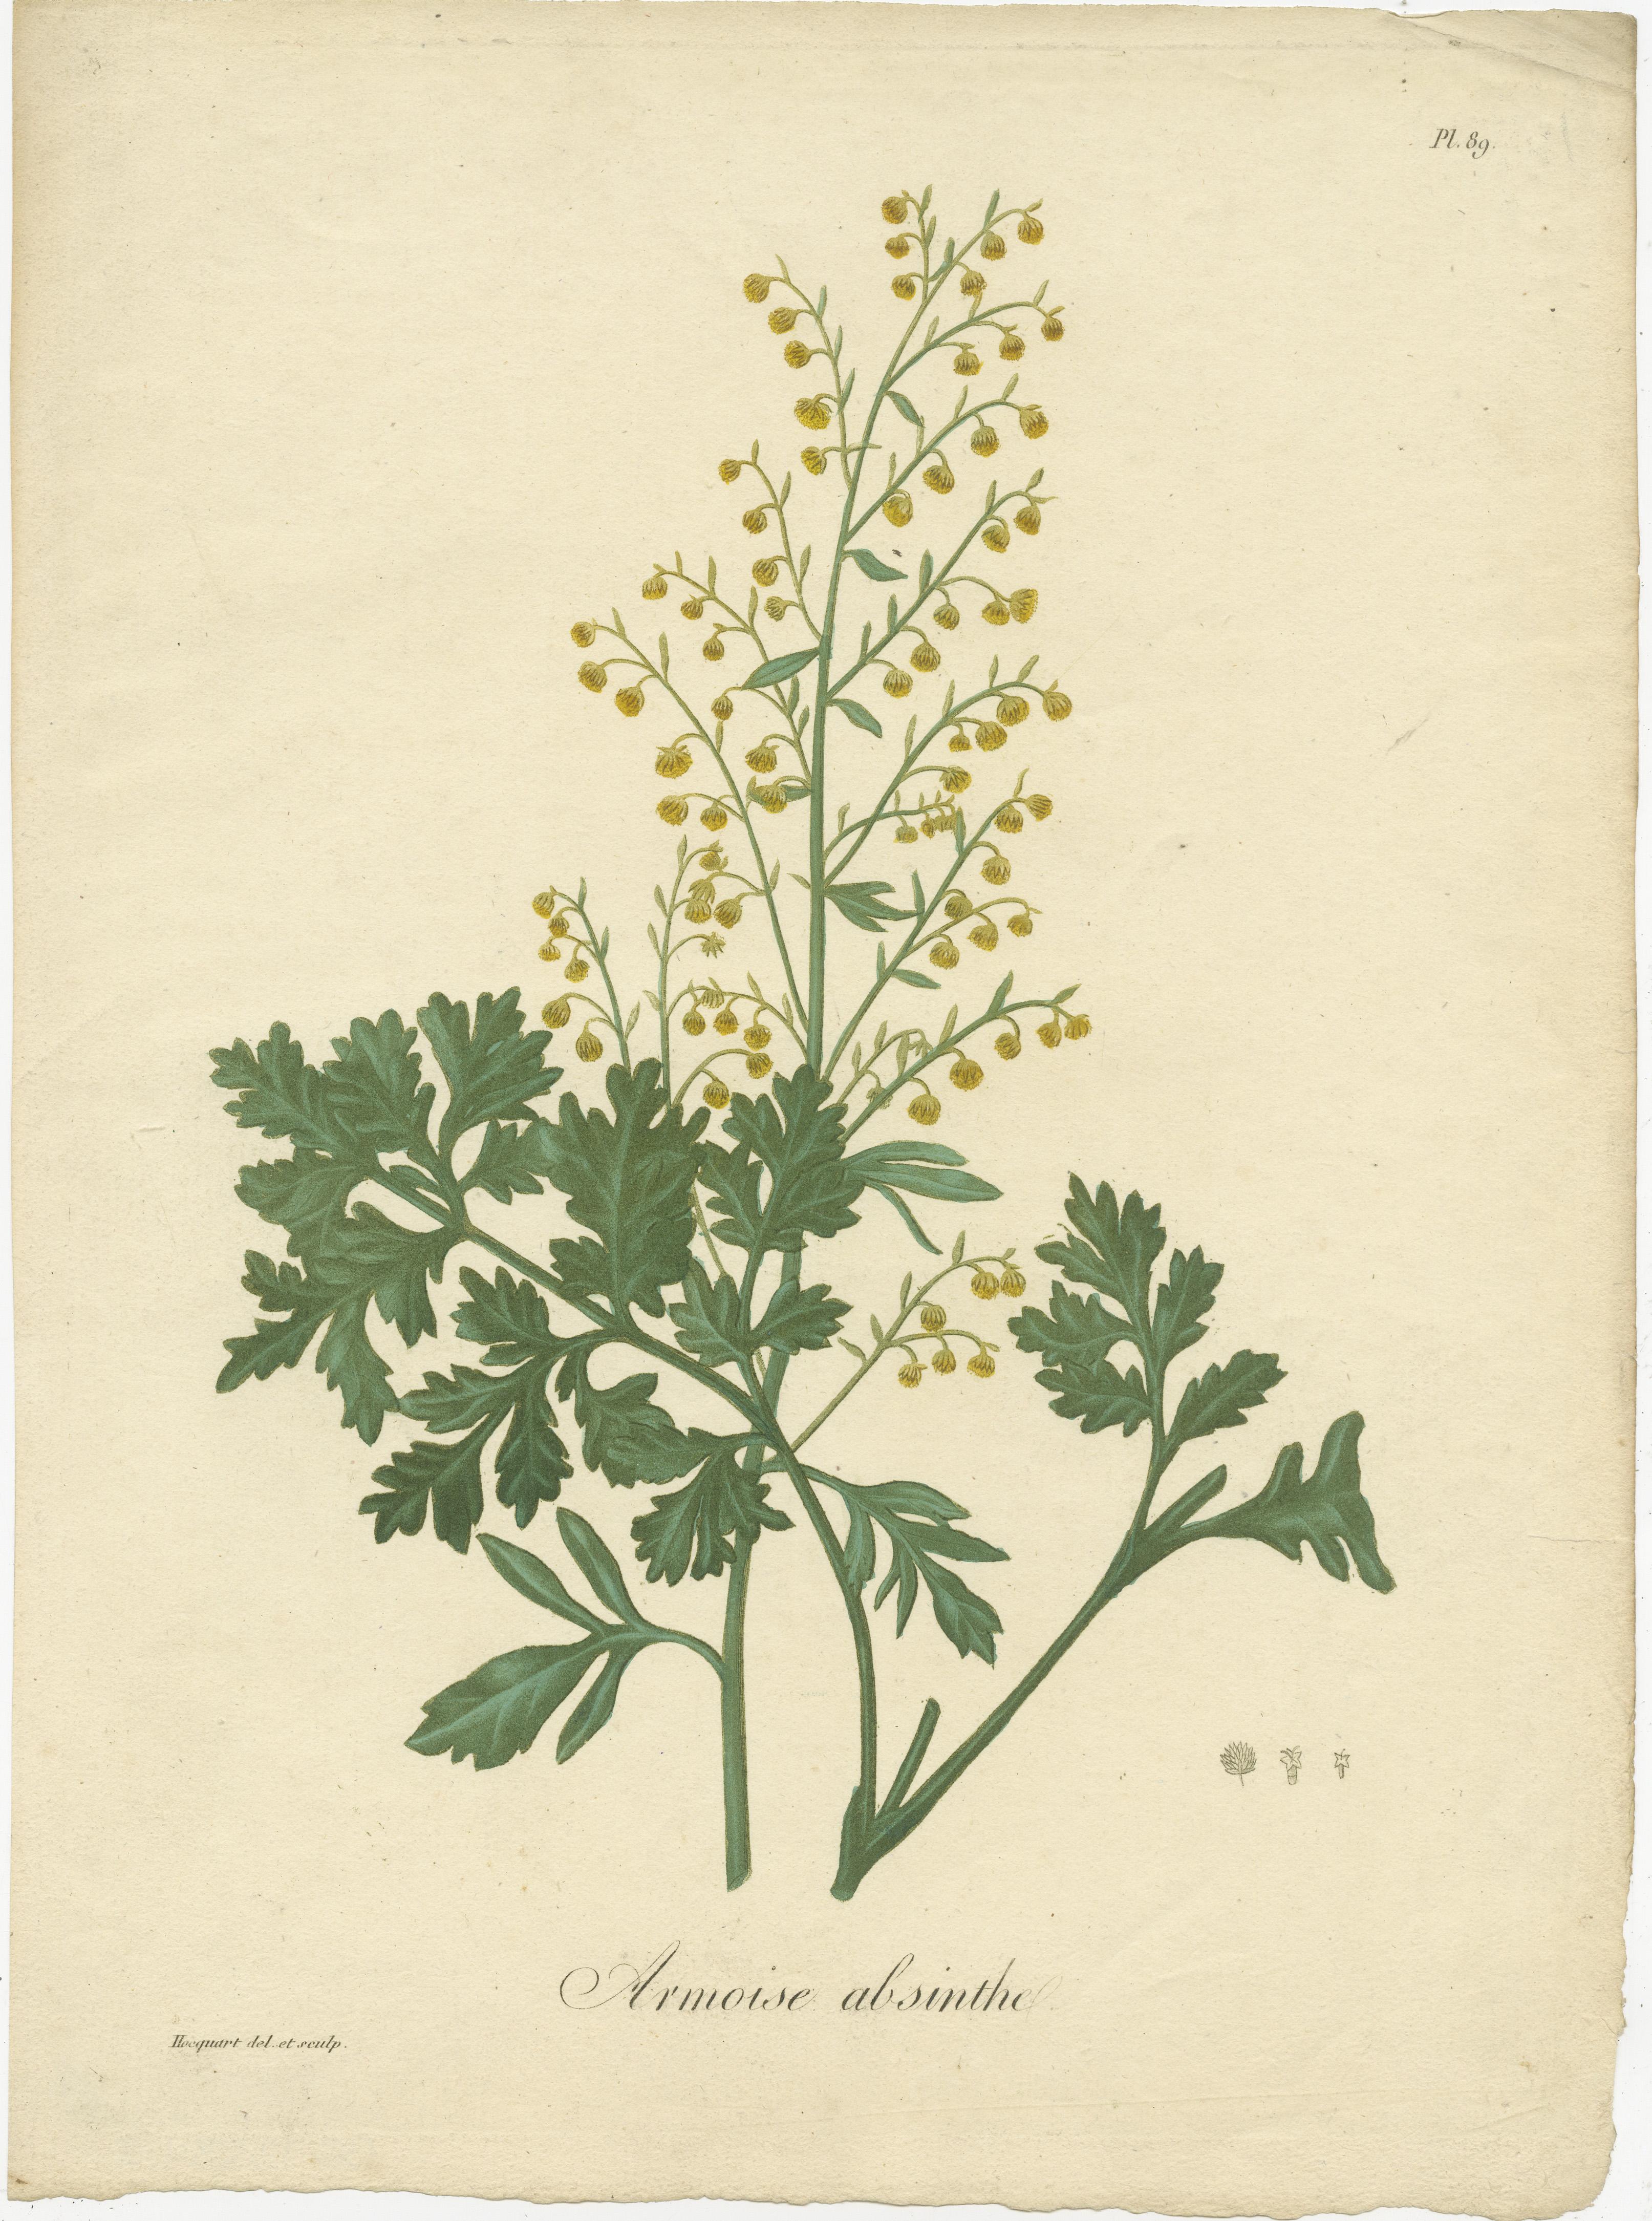 Antique botanical print titled 'Armoise Absinthe'. This print shows the Artemisia Absinthium, also known as wormwood. It is an upright woody-based perennial with finely divided, highly aromatic silver-gray foliage. Tiny, insignificant yellowish